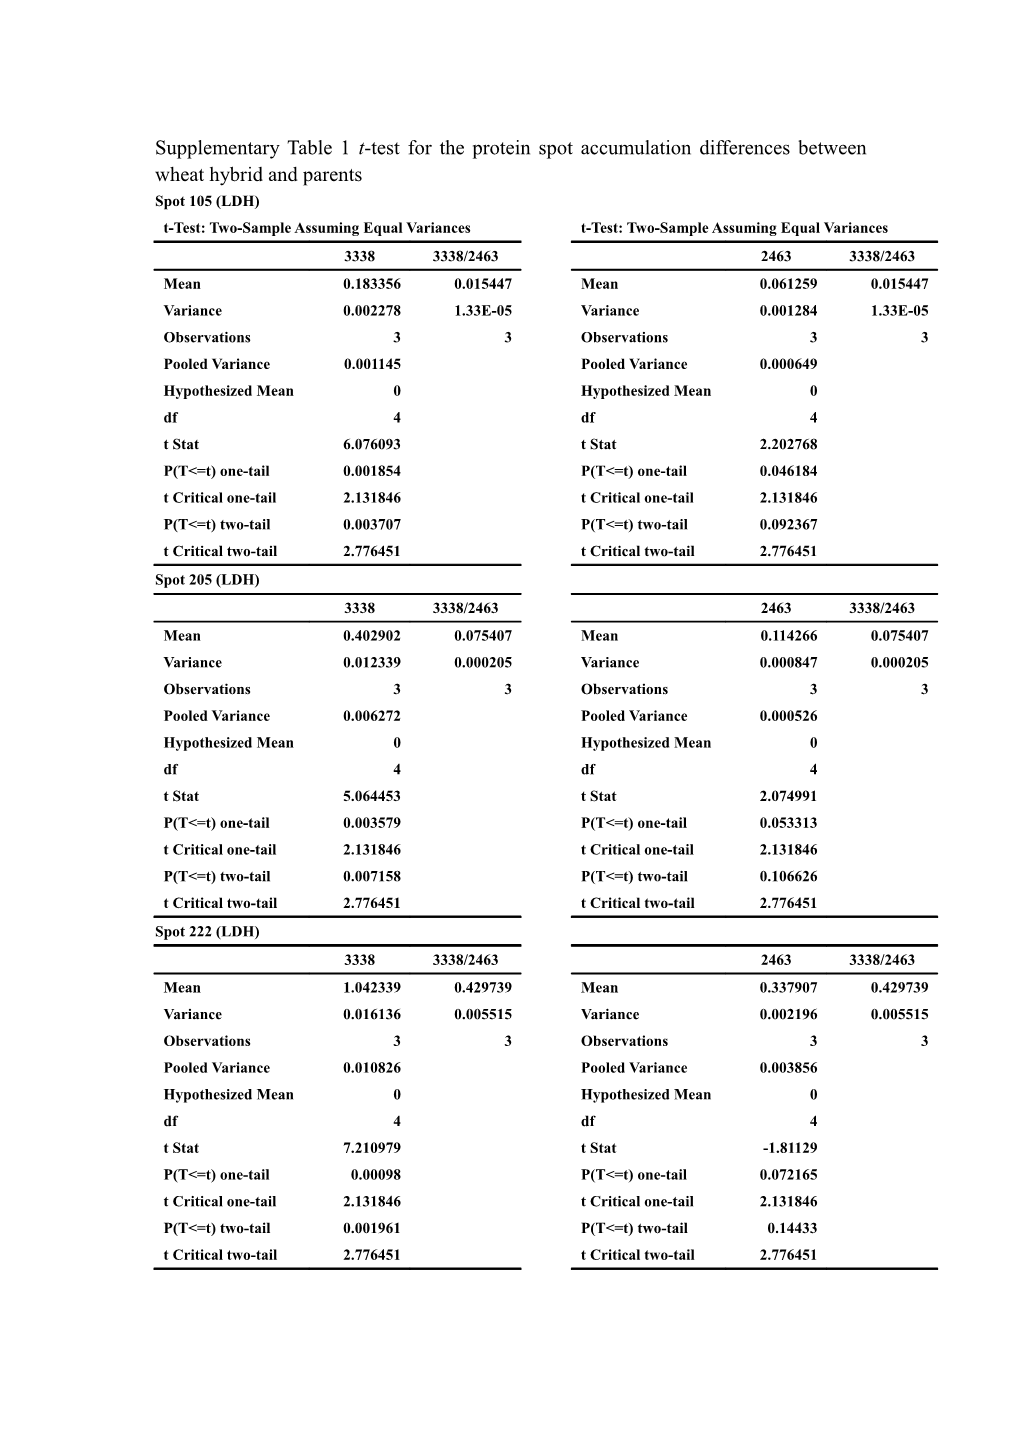 Supplementary Table 1 T-Test for the Protein Spot Accumulation Differences Between Wheat